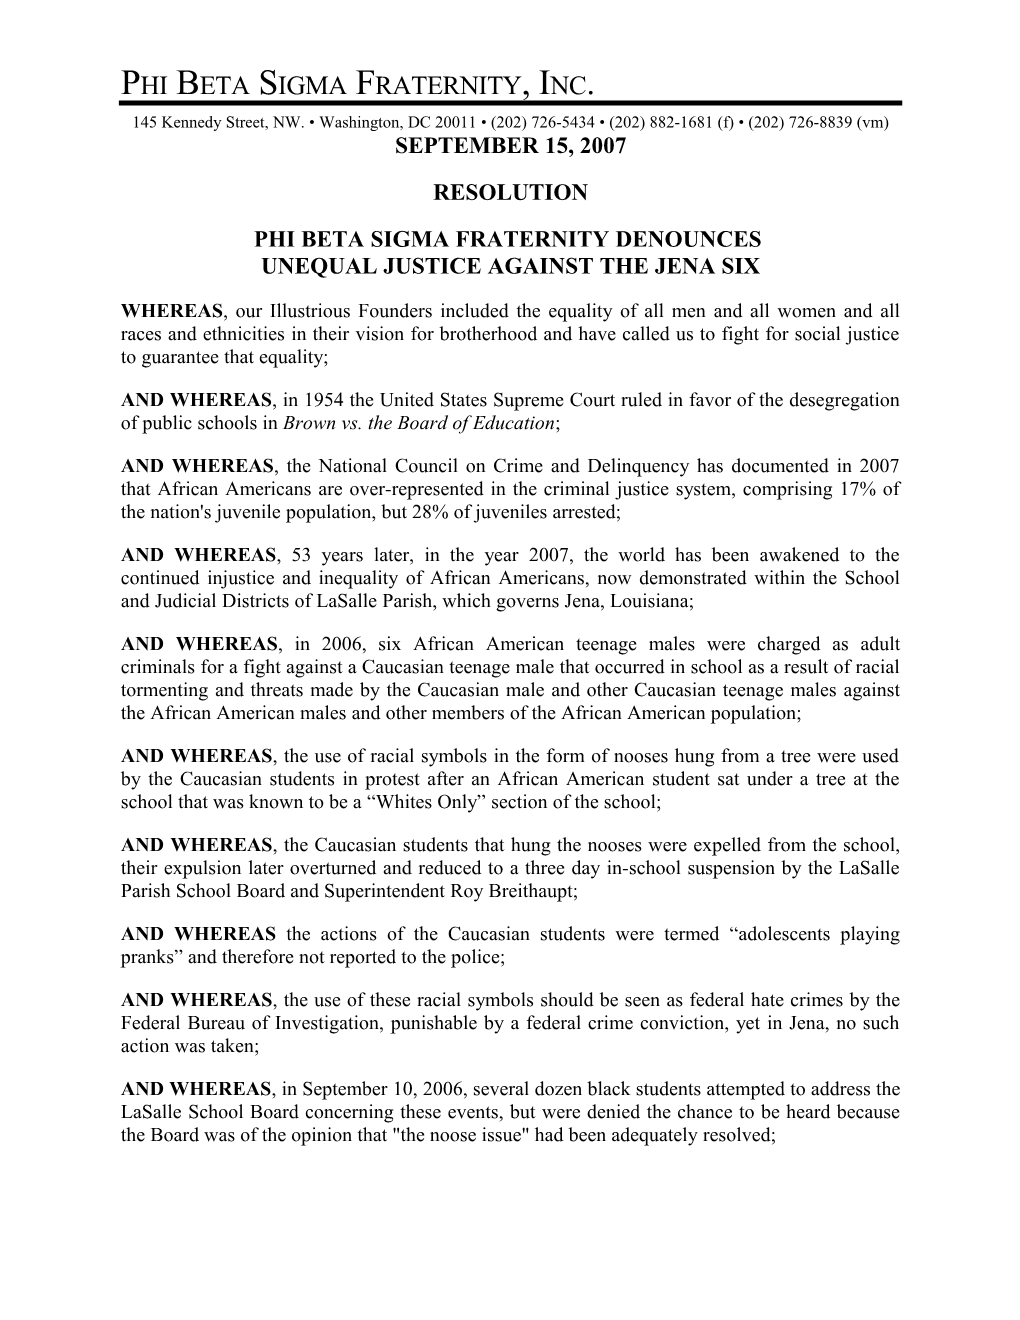 Resolution for the Brothers of Phi Beta Sigma Fraternity to Stand up Against the Injustice